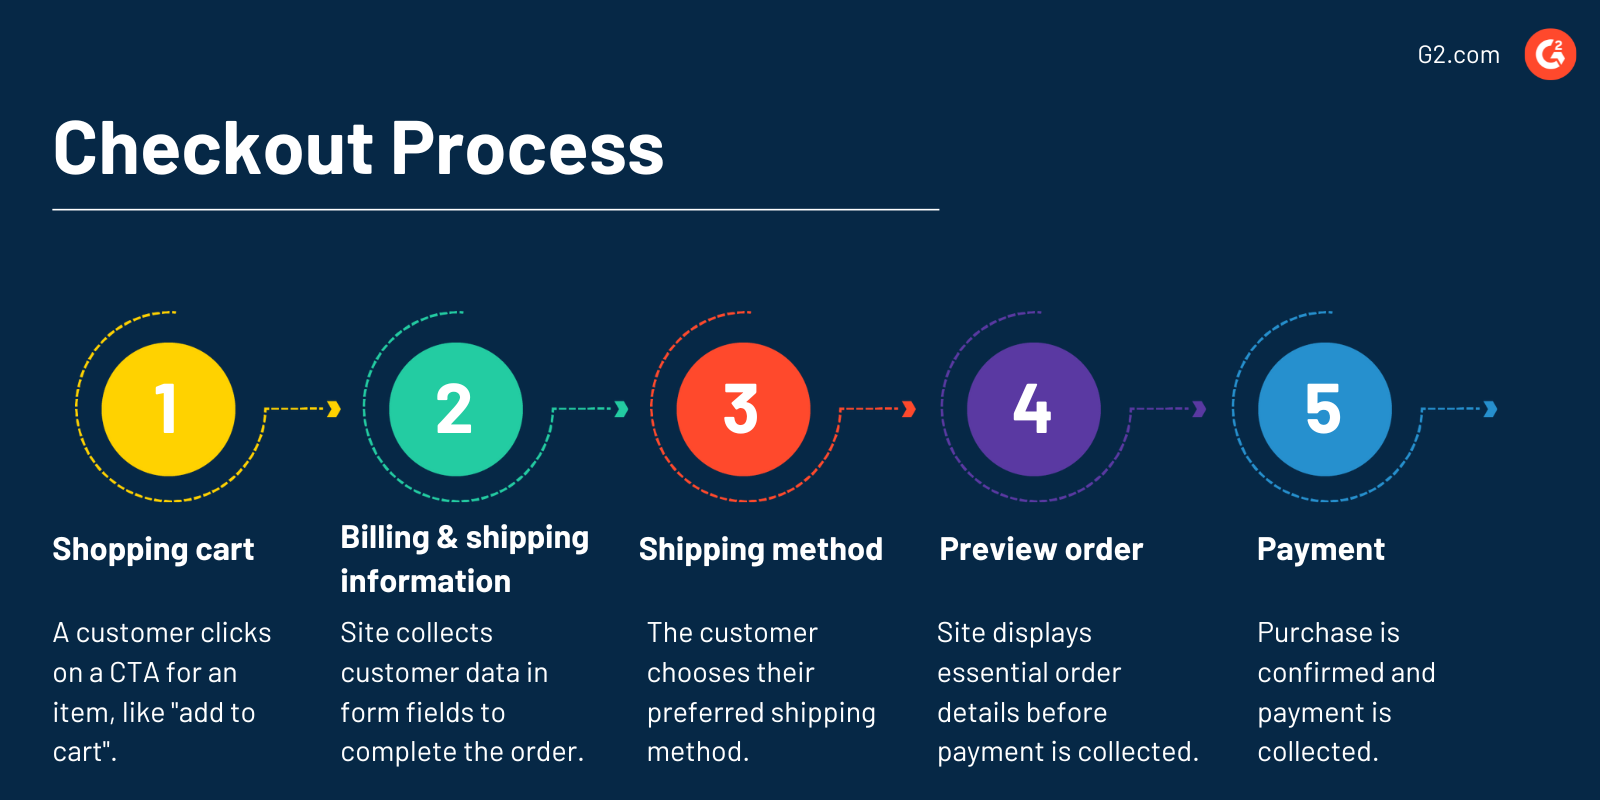 E-commerce checkout process: 12 ways to optimize the experience